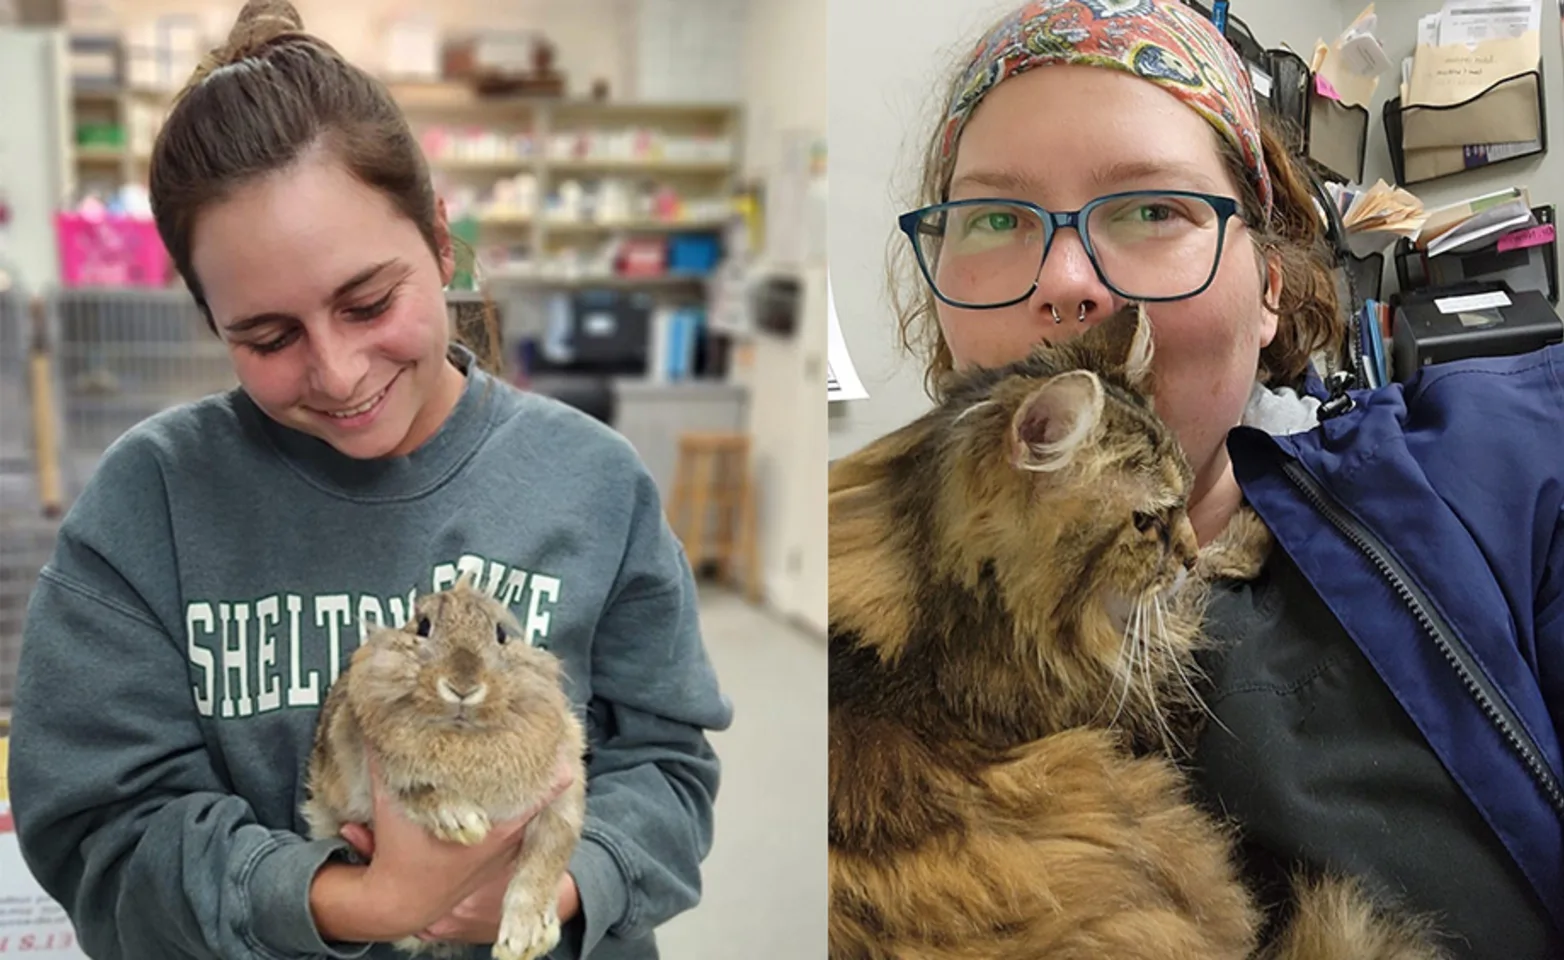 Two photos together, One staff member holding a cat and another staff member holding a rabbit